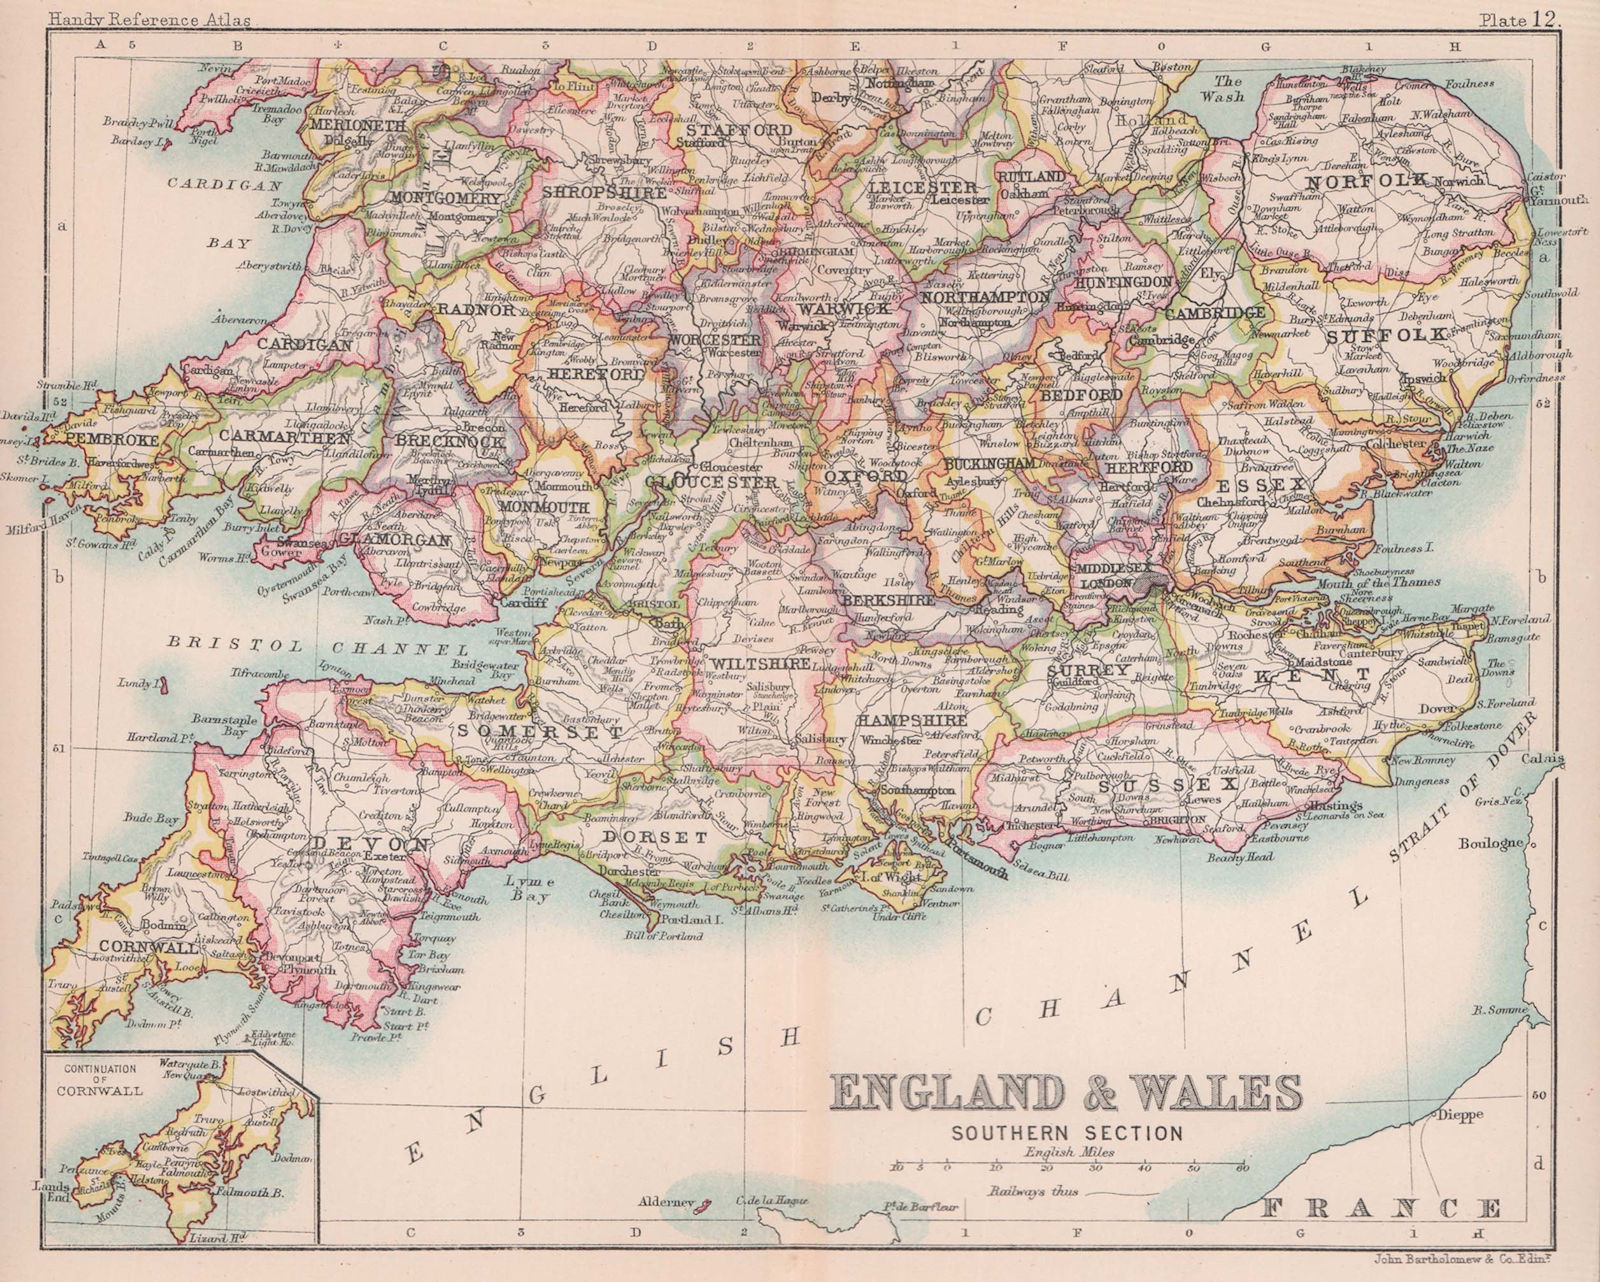 Associate Product Southern England & Wales. BARTHOLOMEW 1893 old antique vintage map plan chart